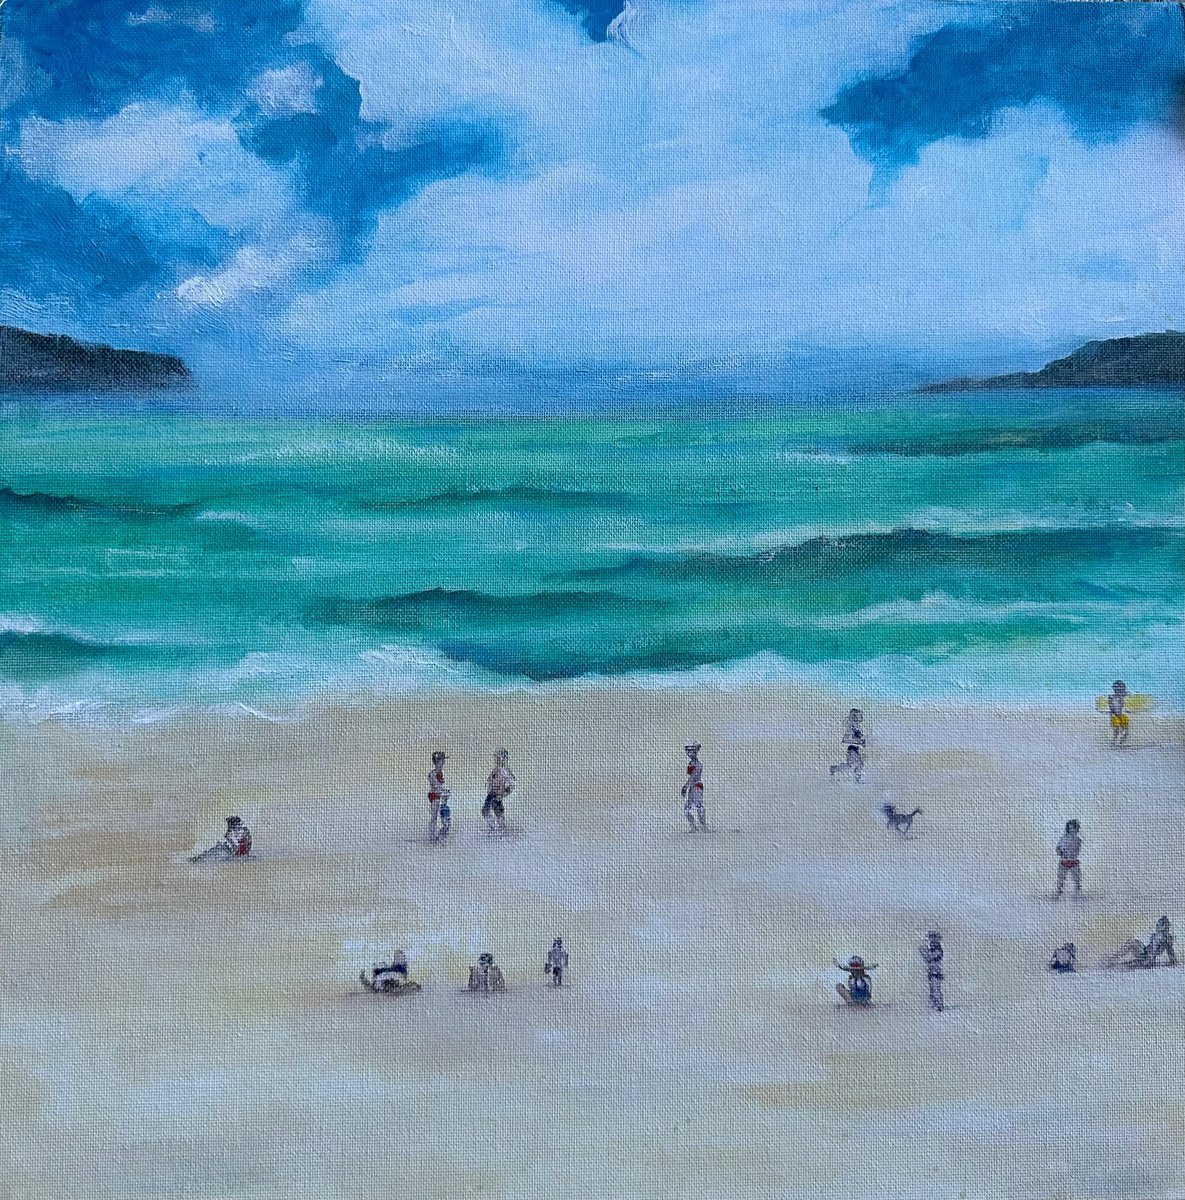 A beach day - Lowry’s people having a chill  from the factory by Clare Hoath